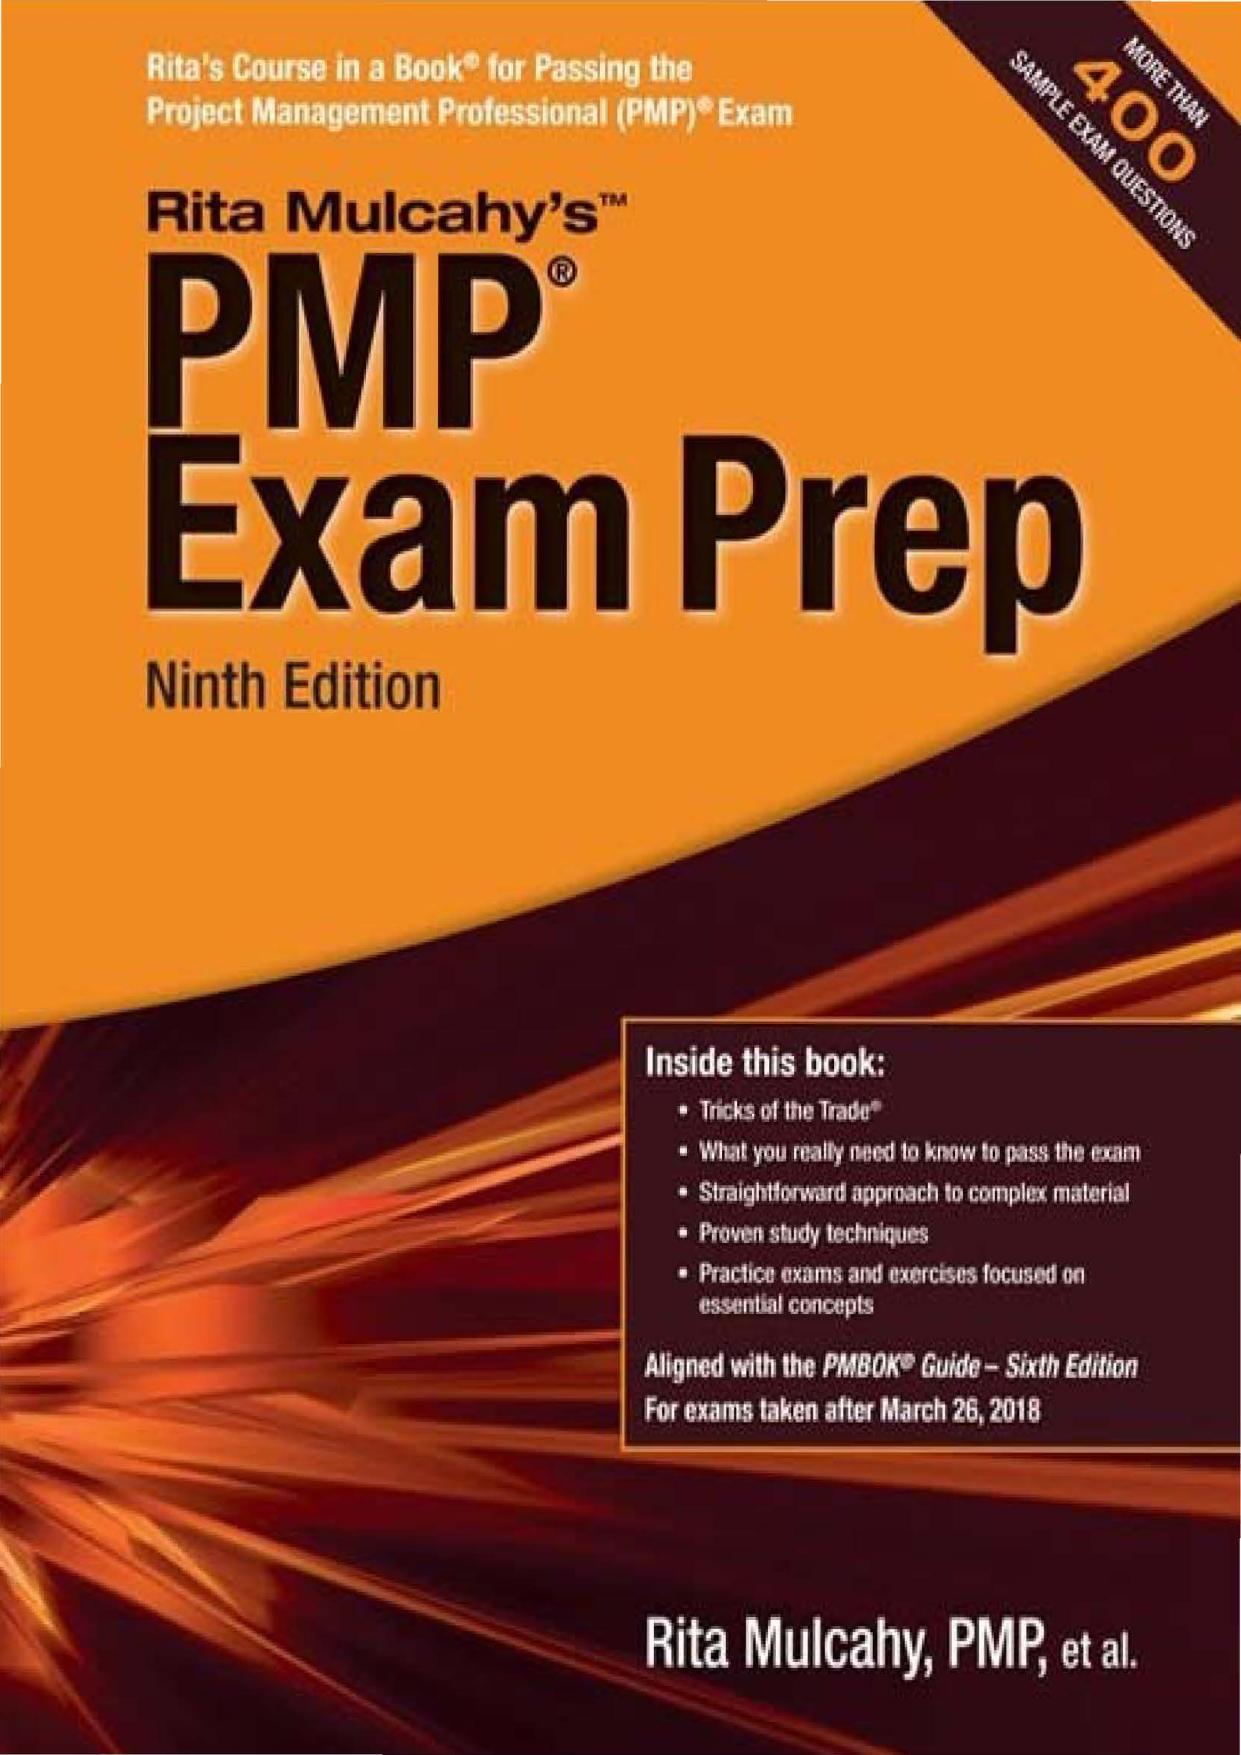 PMP® Exam Prep: Accelerated Learning to Pass PMI's PMP® Exam - 9th. Edition